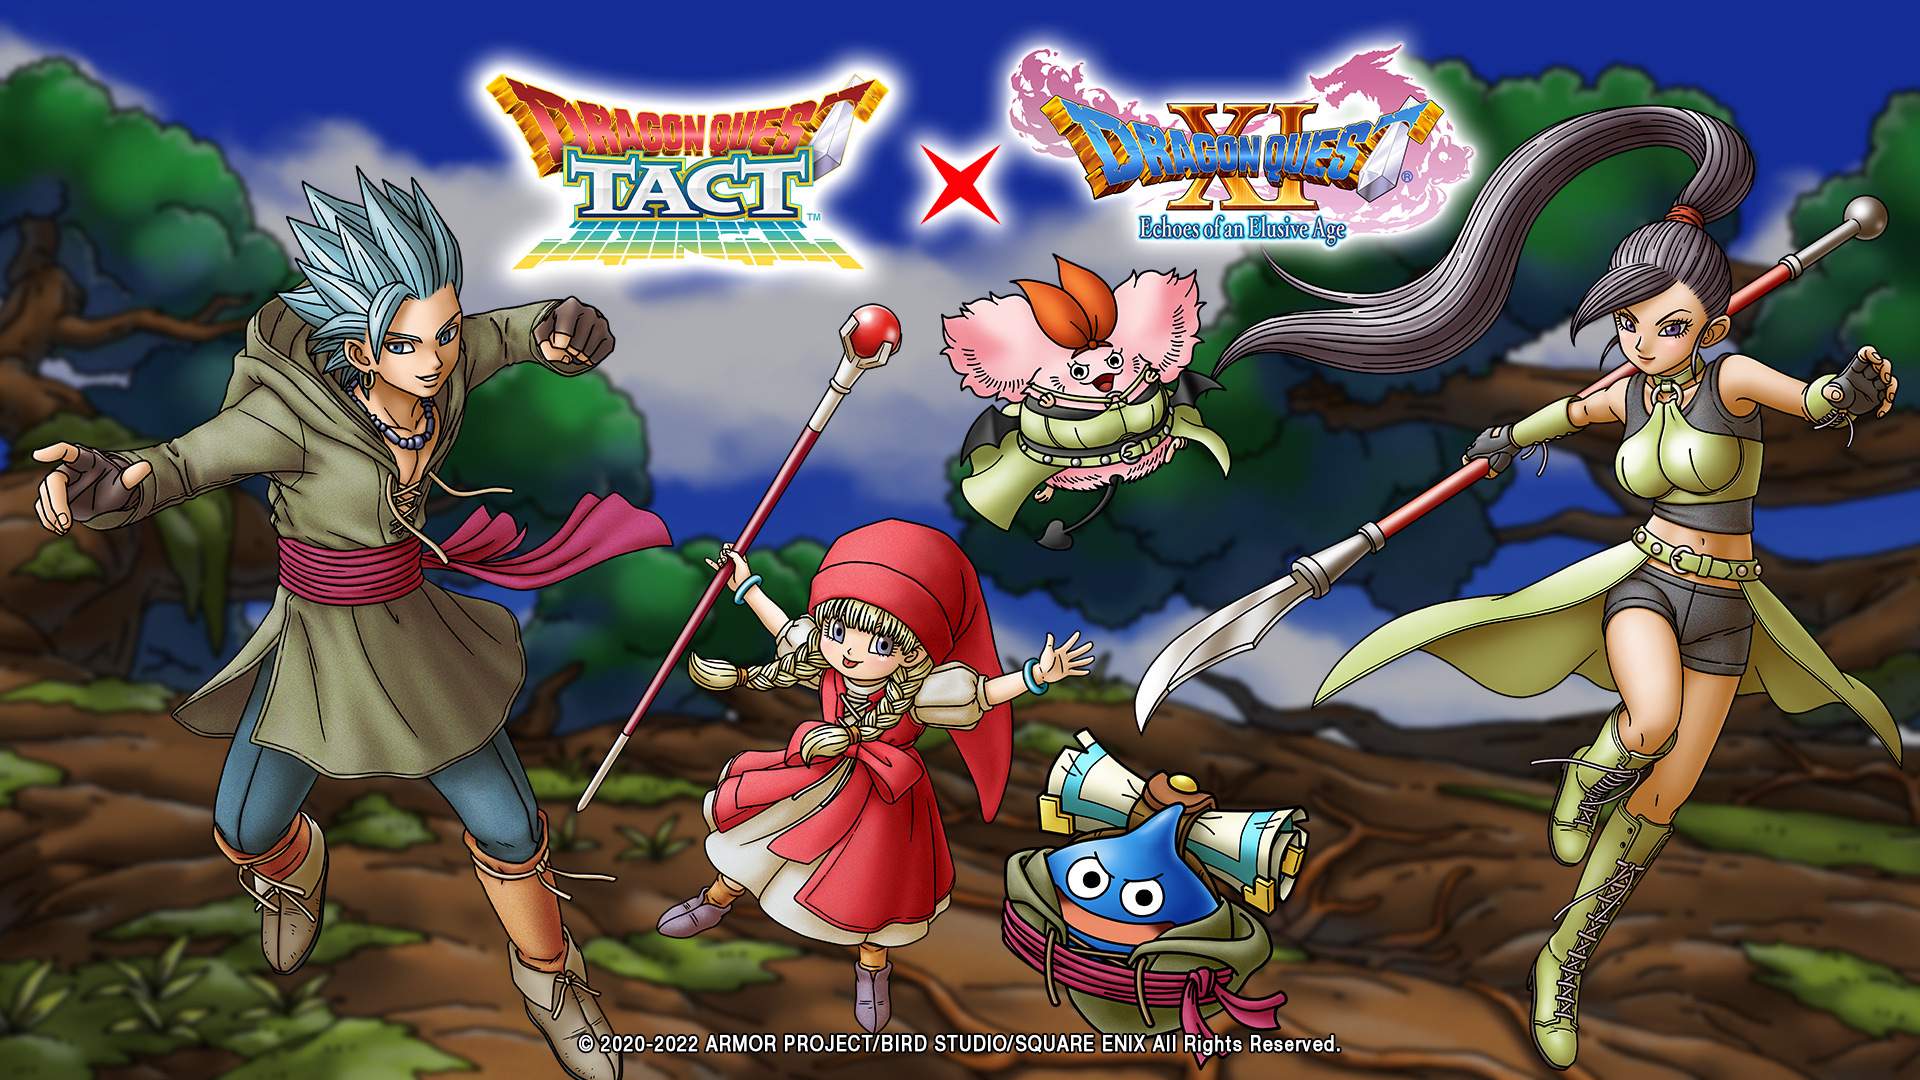 DRAGON QUEST XI Collaboration in DRAGON QUEST TACT featuring Erik, Veronica, and Jade